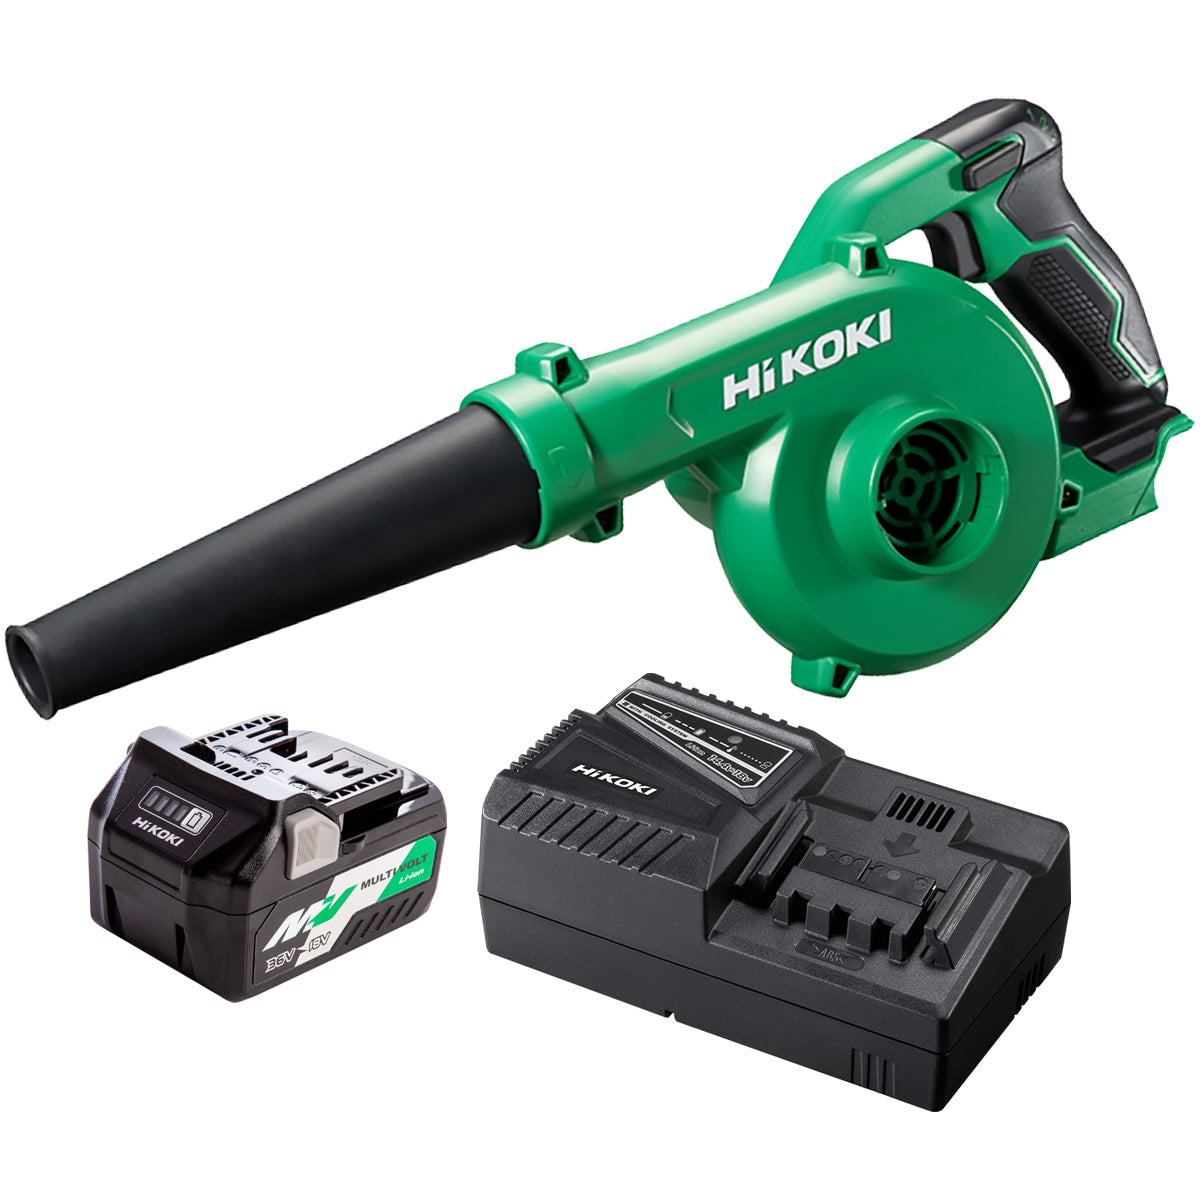 HIKOKI RB18DC/W4Z 18V Cordless Blower with 1 x 2.5Ah/5.0Ah Battery & Charger